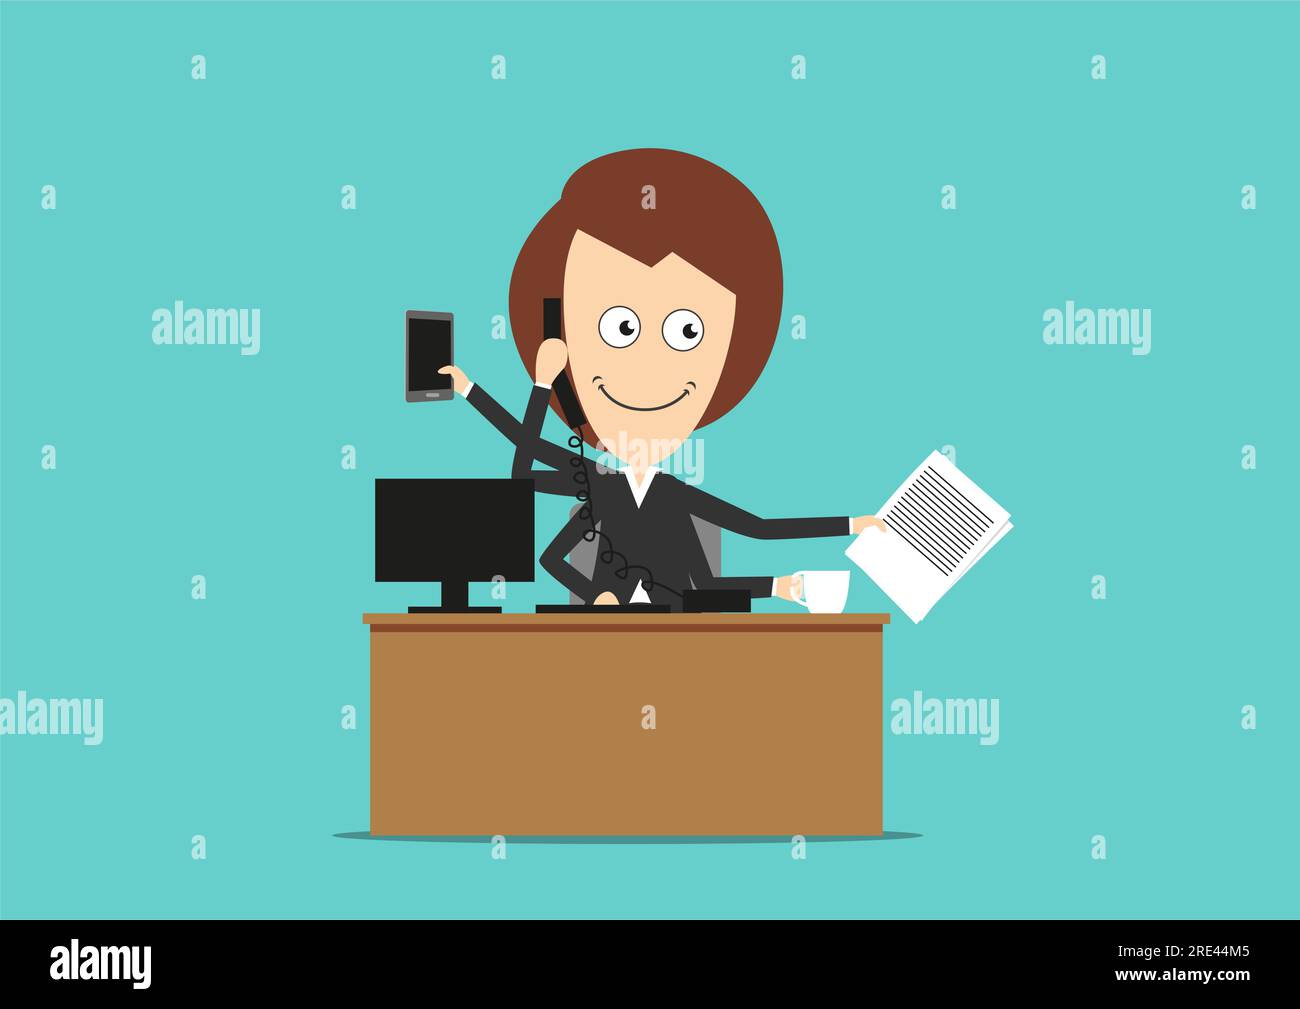 Cartoon confident multitasking businesswoman with many hands doing several office tasks at once. Use as multitasking and hard working theme design Stock Vector